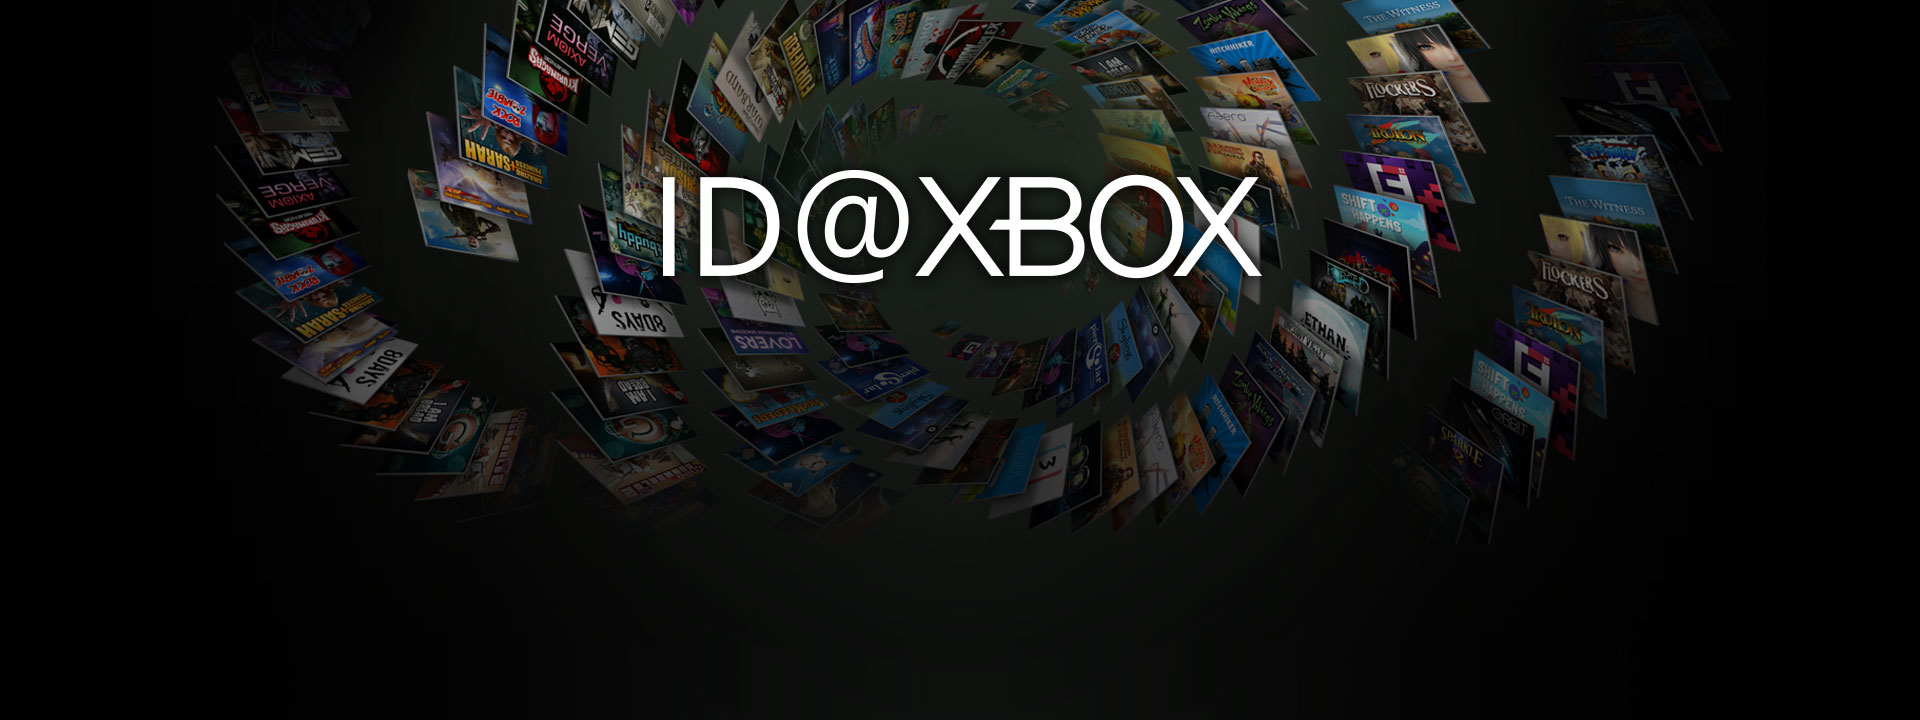 ID at Xbox logo in front of a collection of box shots from ID games